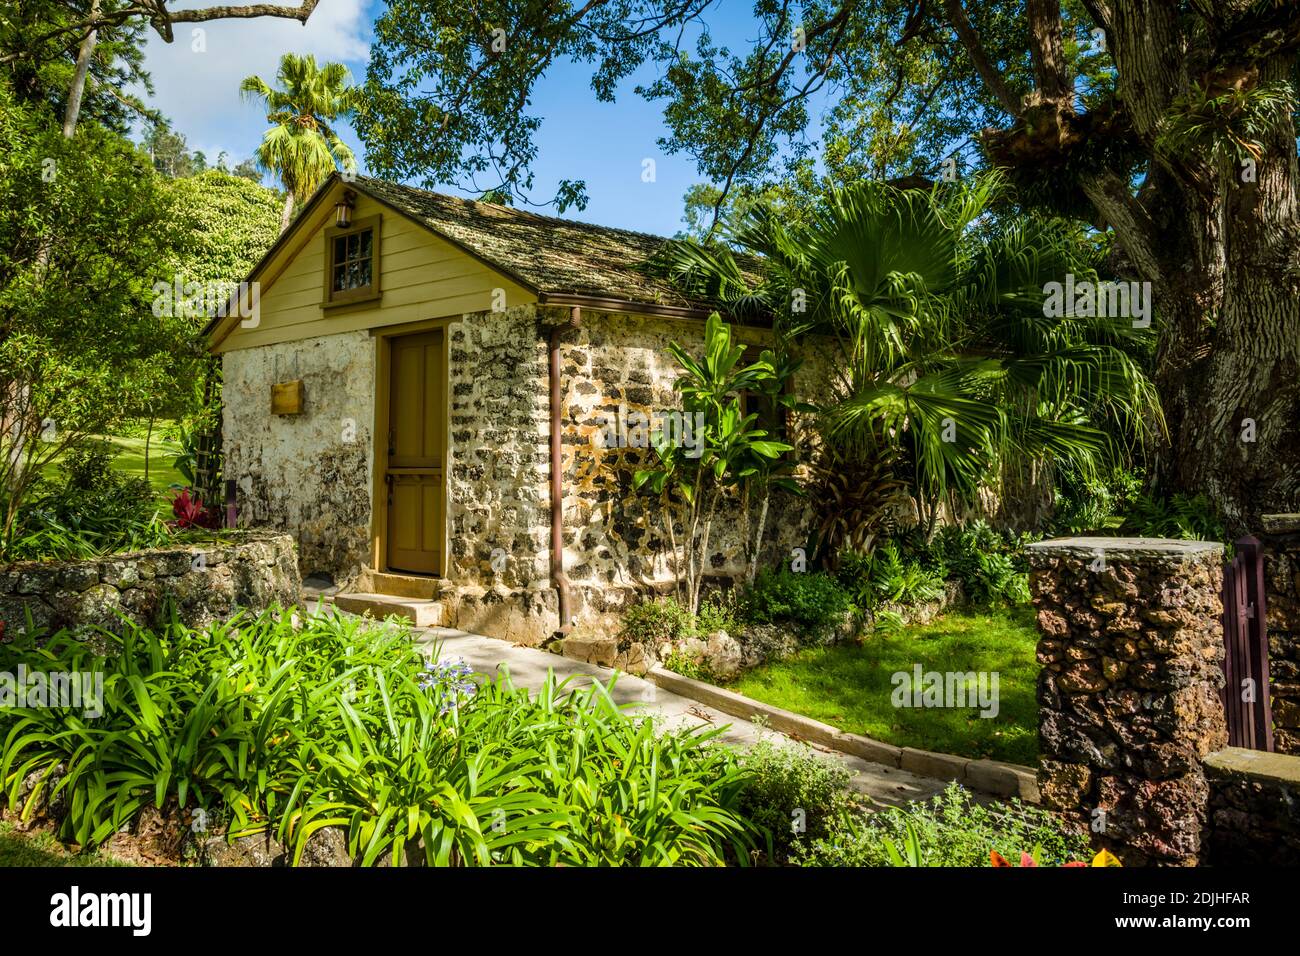 Maui, Hawaii, Upcountry, MauiWine (formerly known as Tedeshi Winery), Old Jail Stock Photo